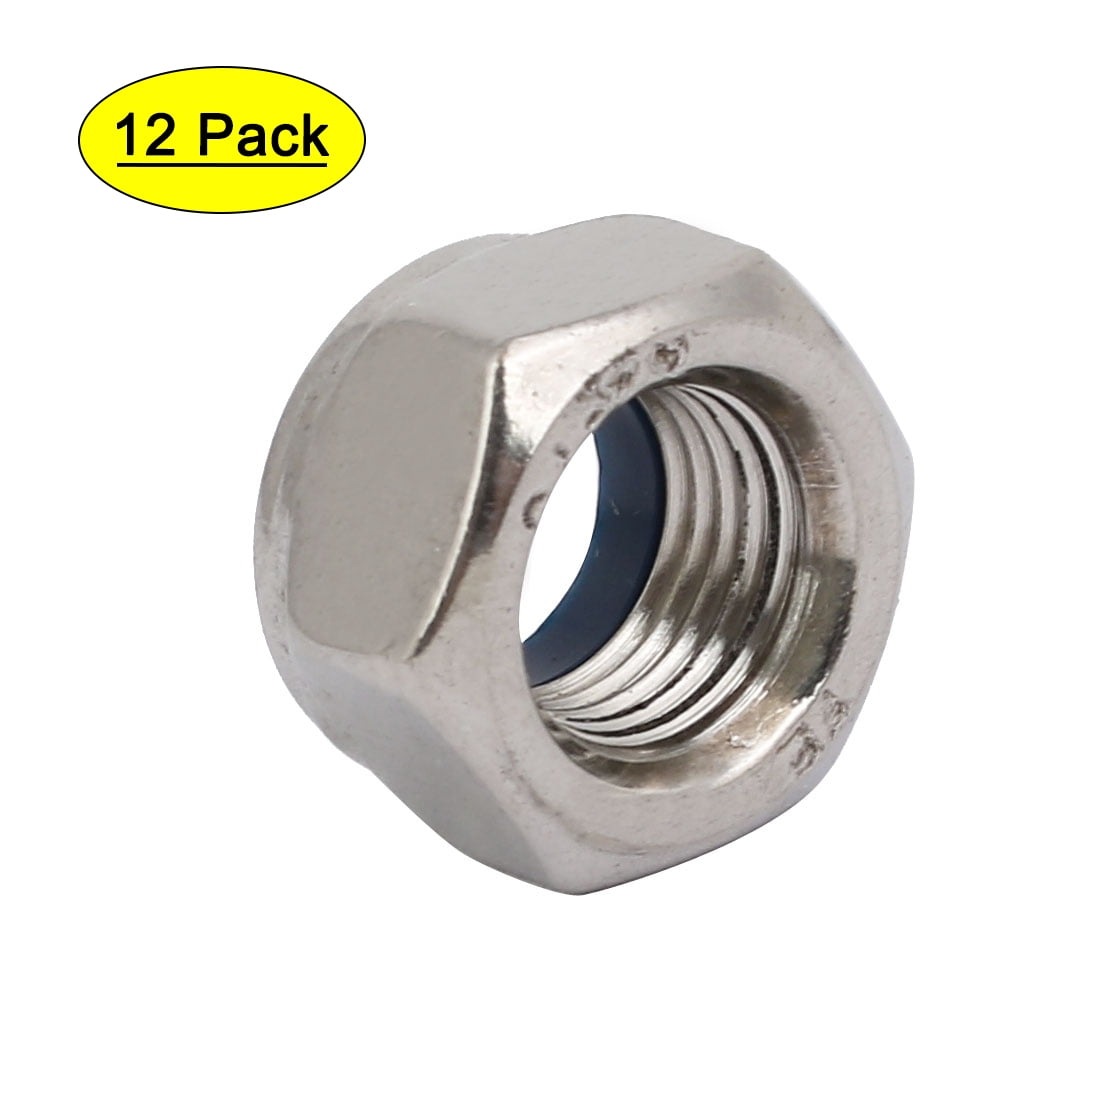 Pack of 20 304 Stainless Steel TOUHIA 7/16-20 Fine Thread Hex Nuts 